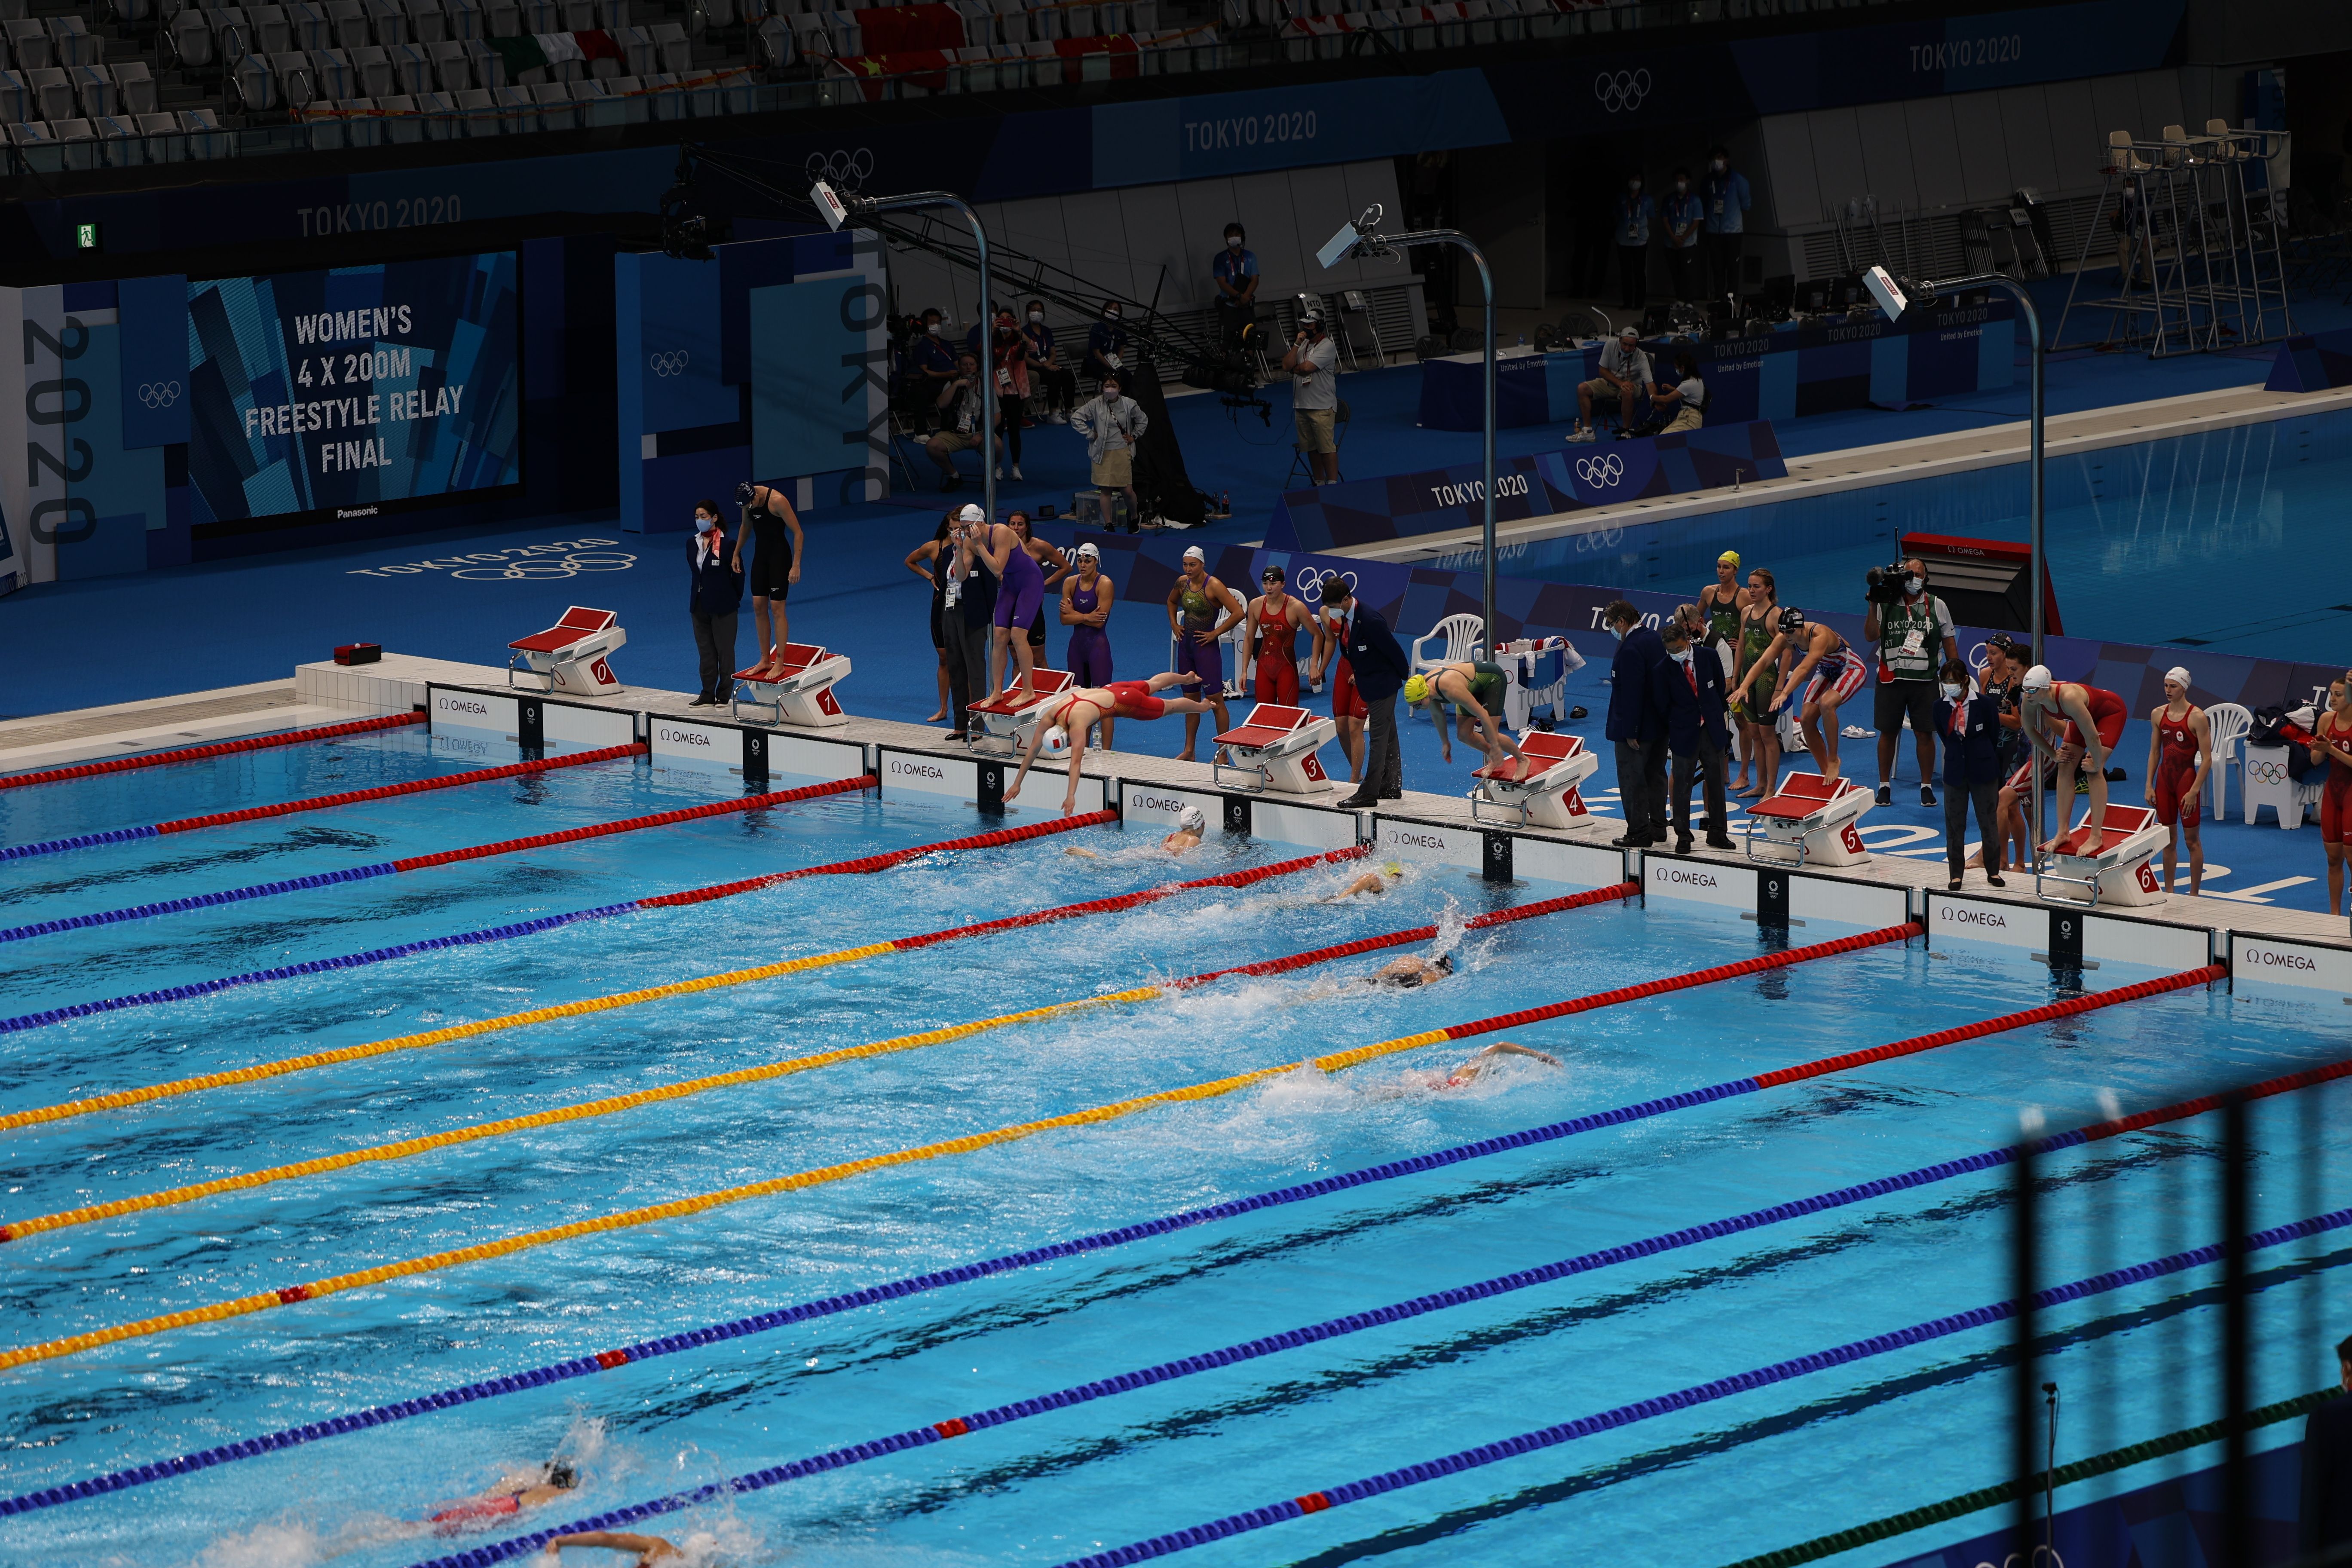 Scenes from the women's 4x200m freestyle relay final at the Tokyo Games July 29